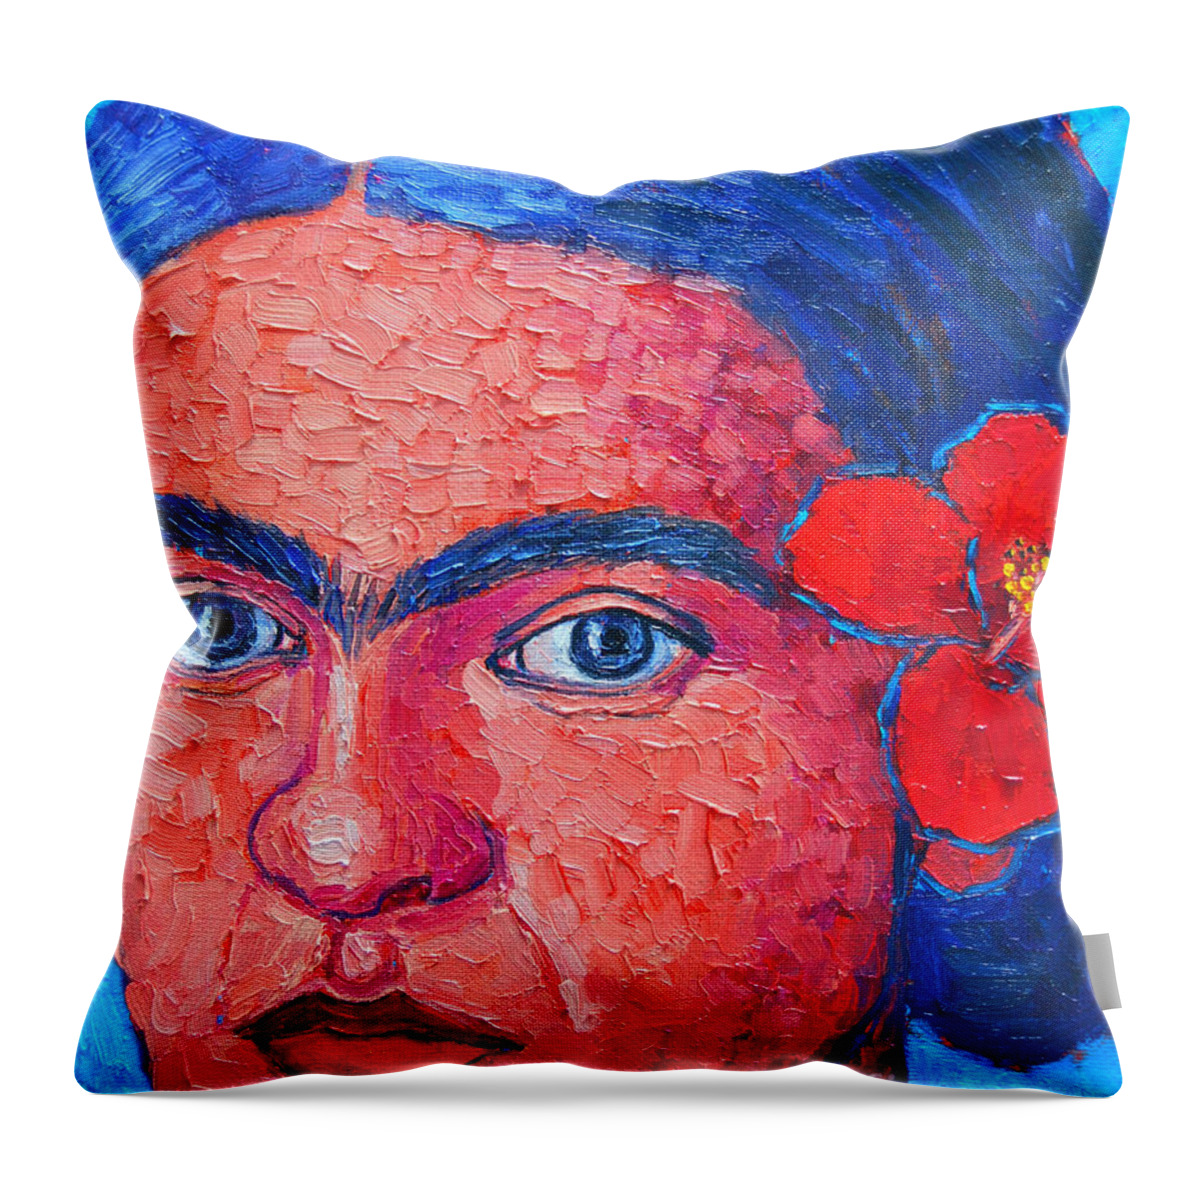 Frida Throw Pillow featuring the painting Young Frida Kahlo by Ana Maria Edulescu